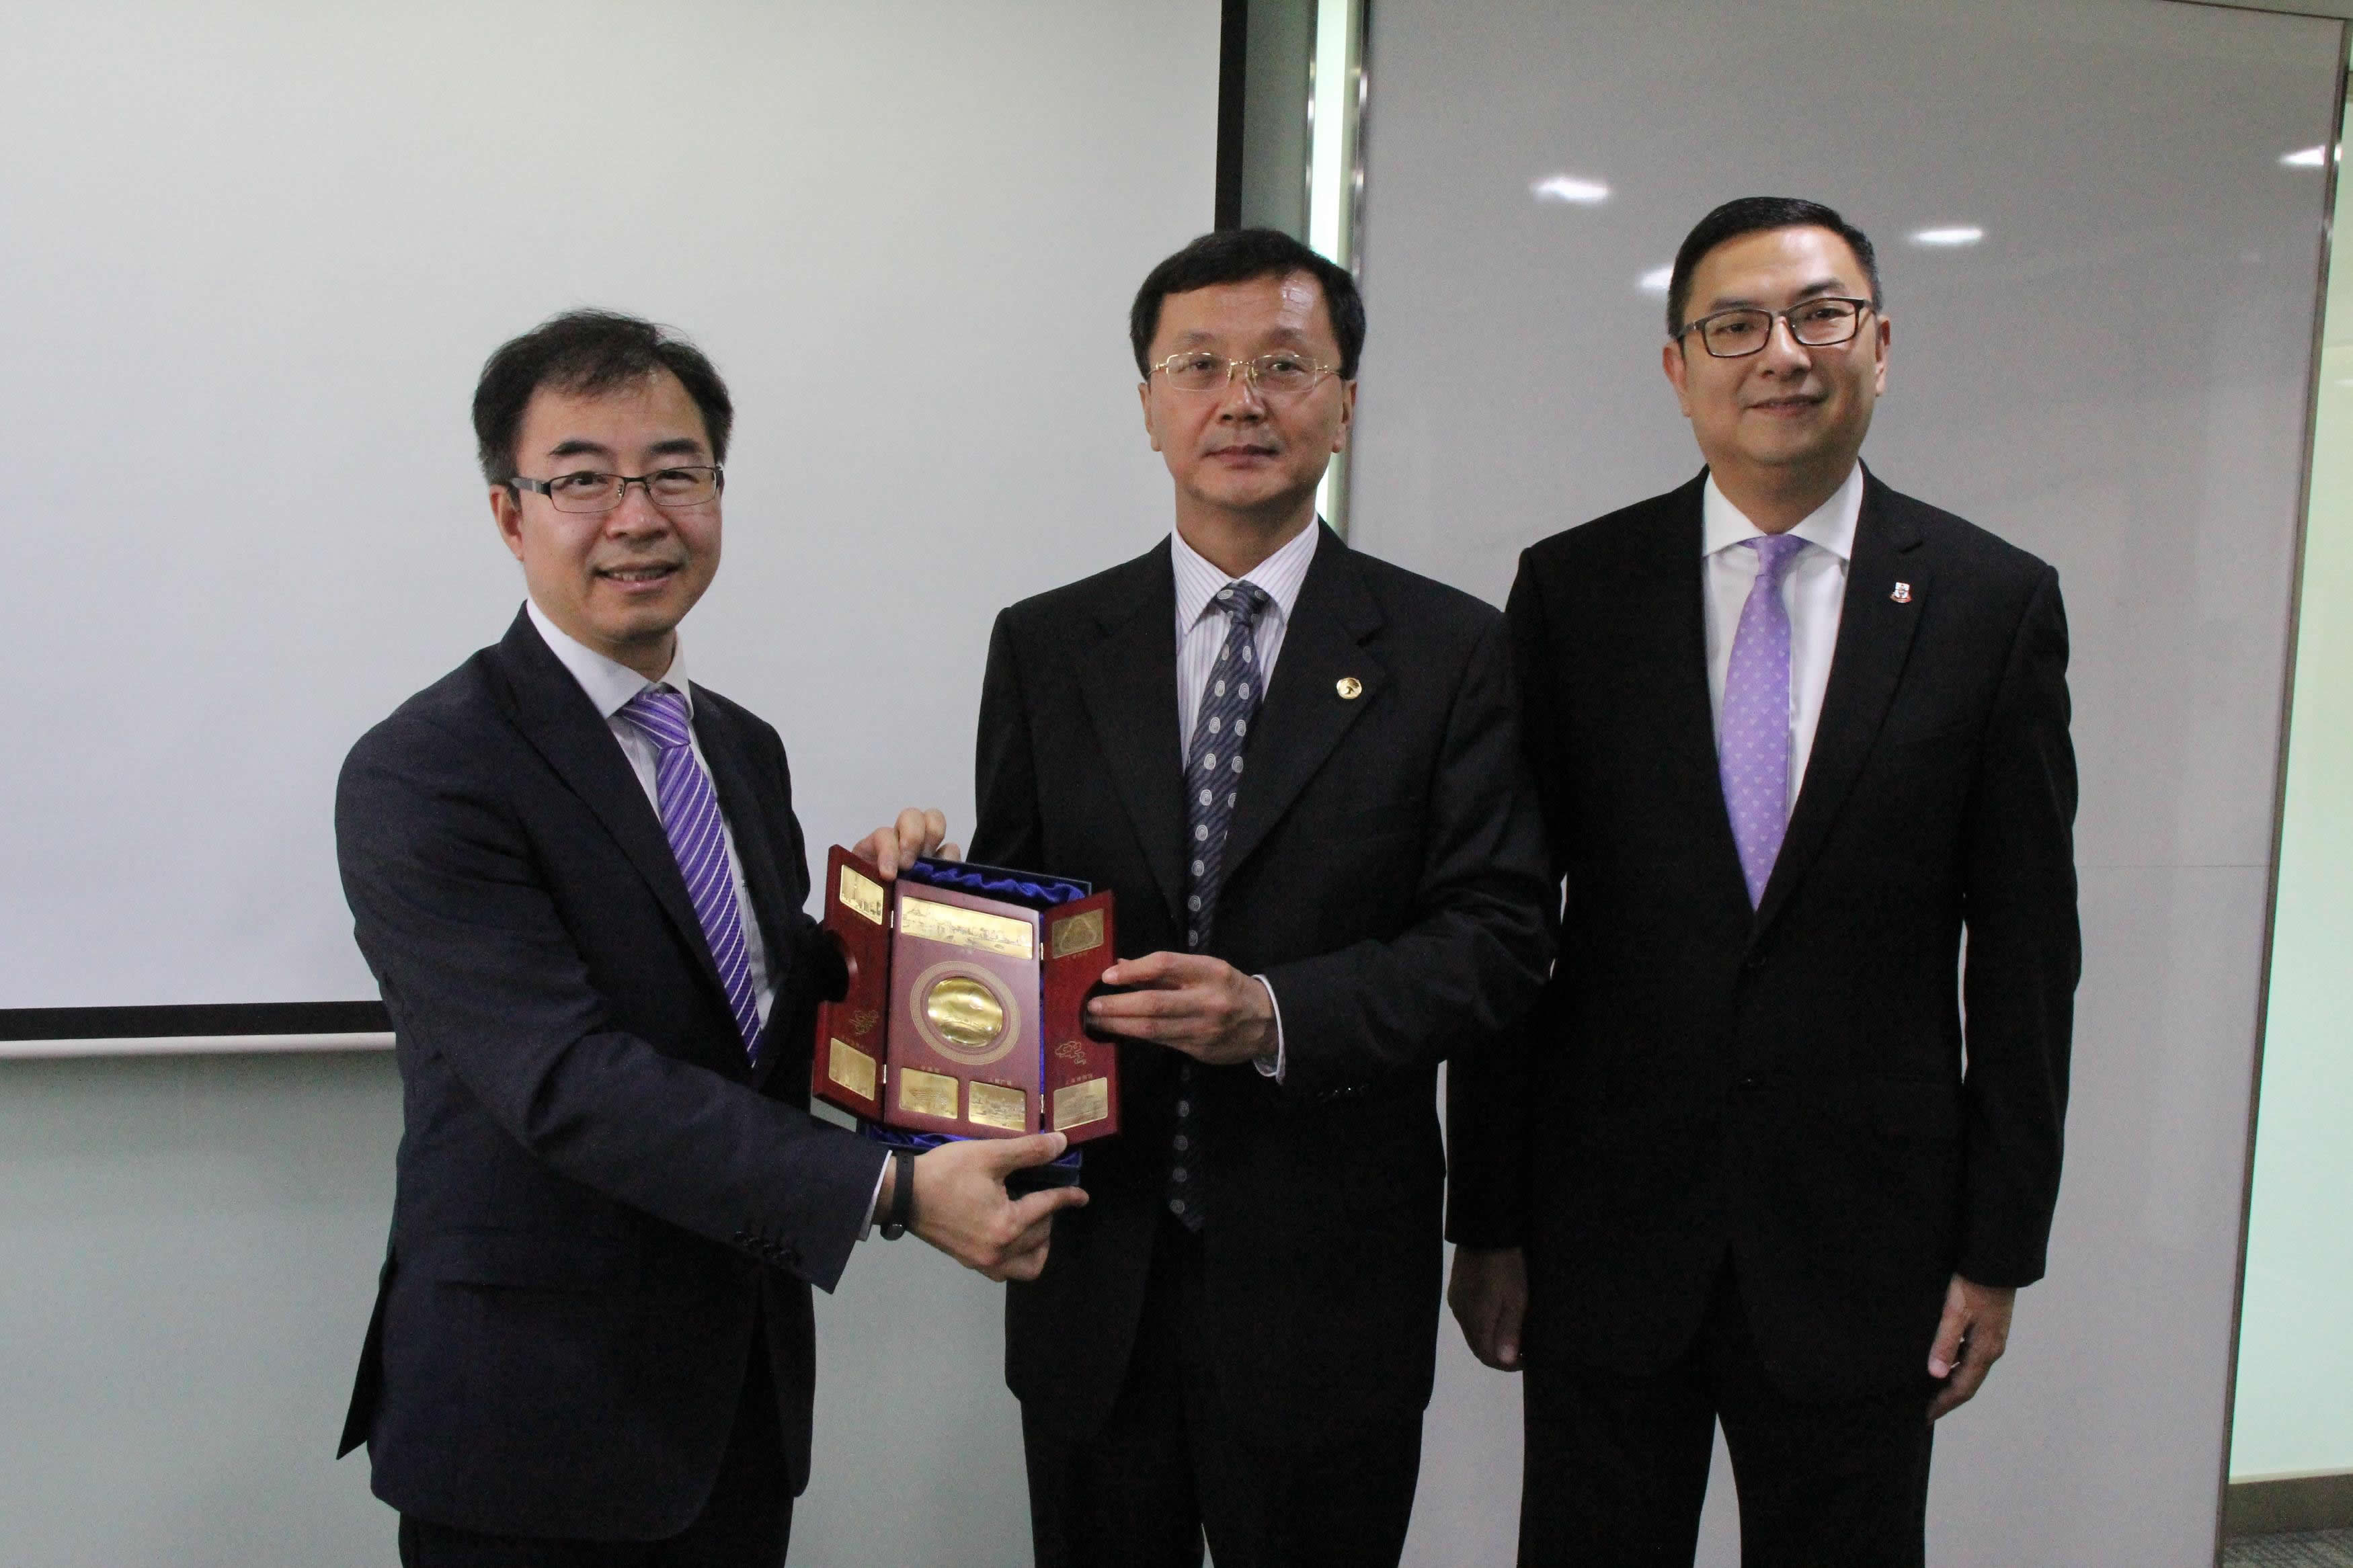 Delegation from Shanghai visits Tung Wah College (18 September 2015)